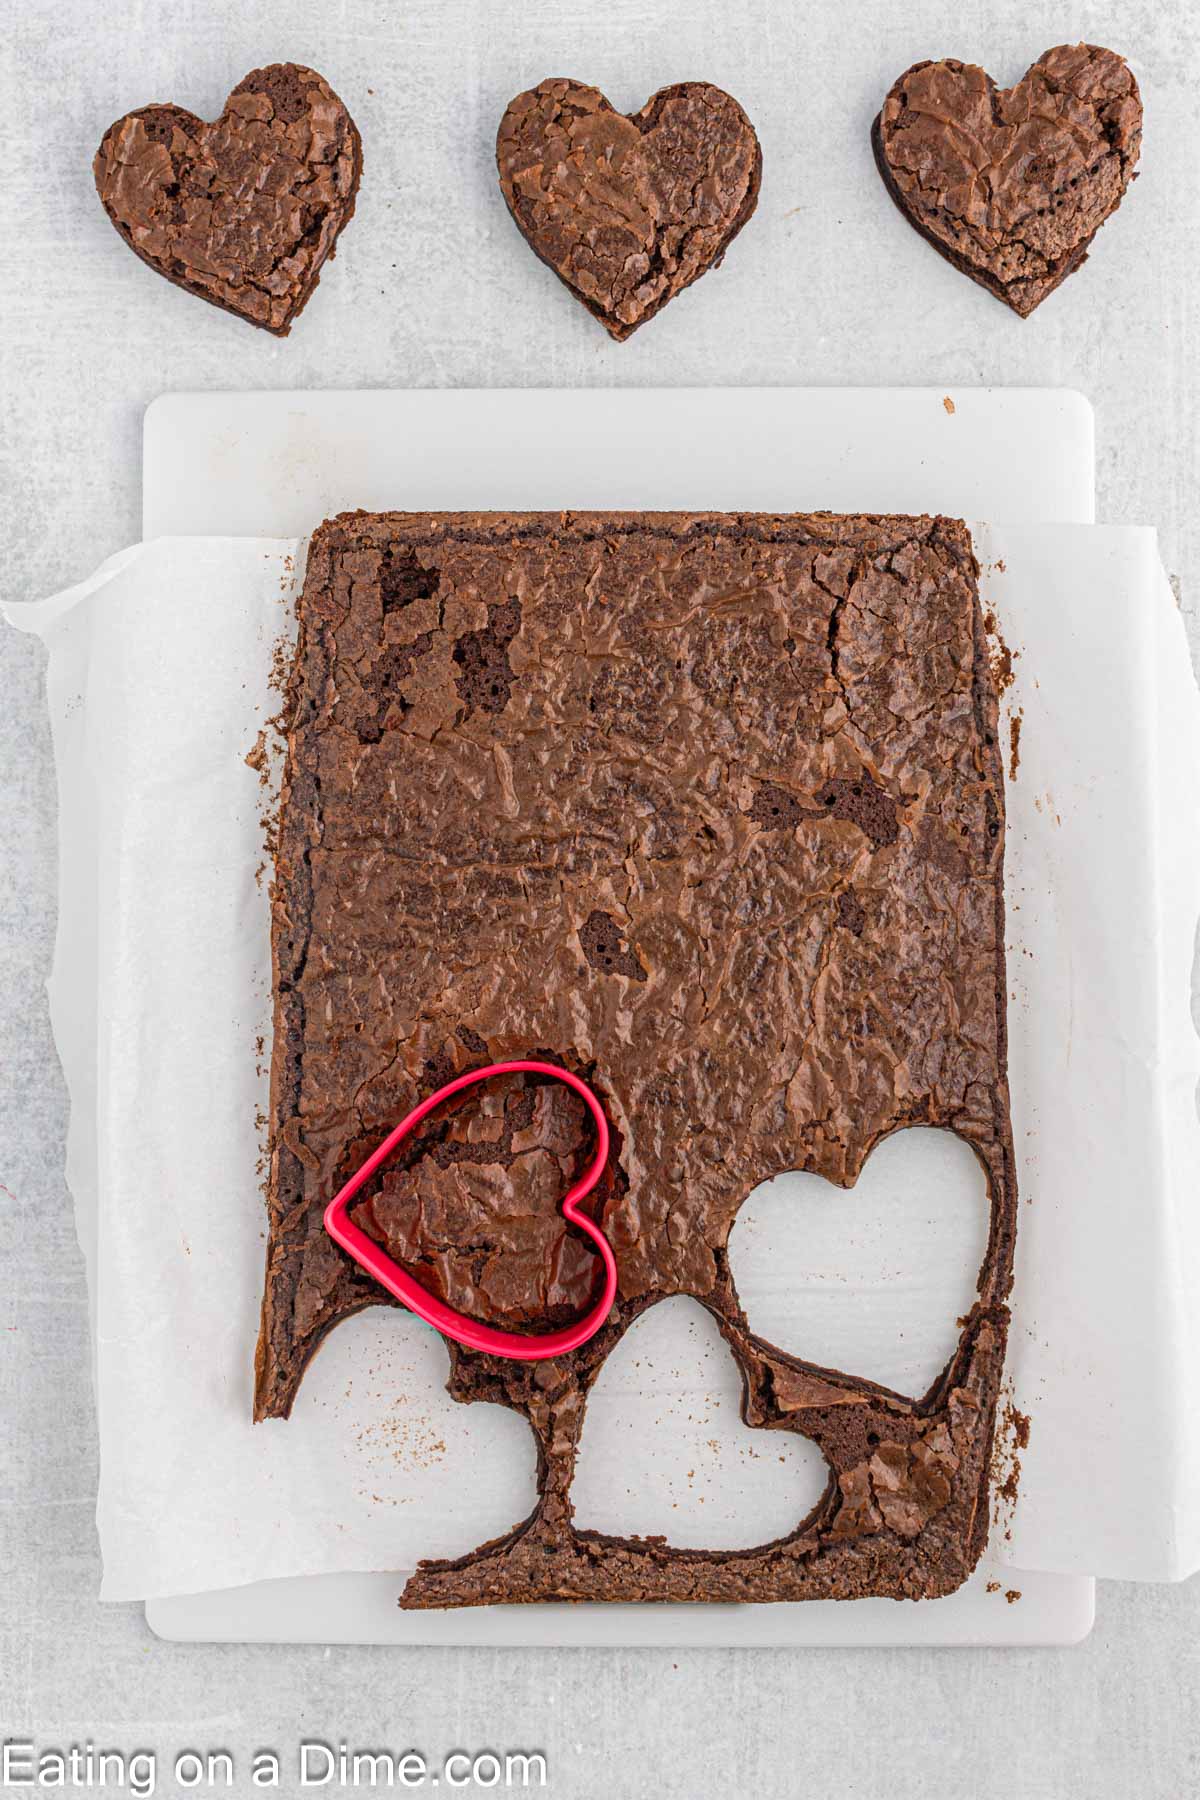 Cutting heart shaped brownies on a cutting board